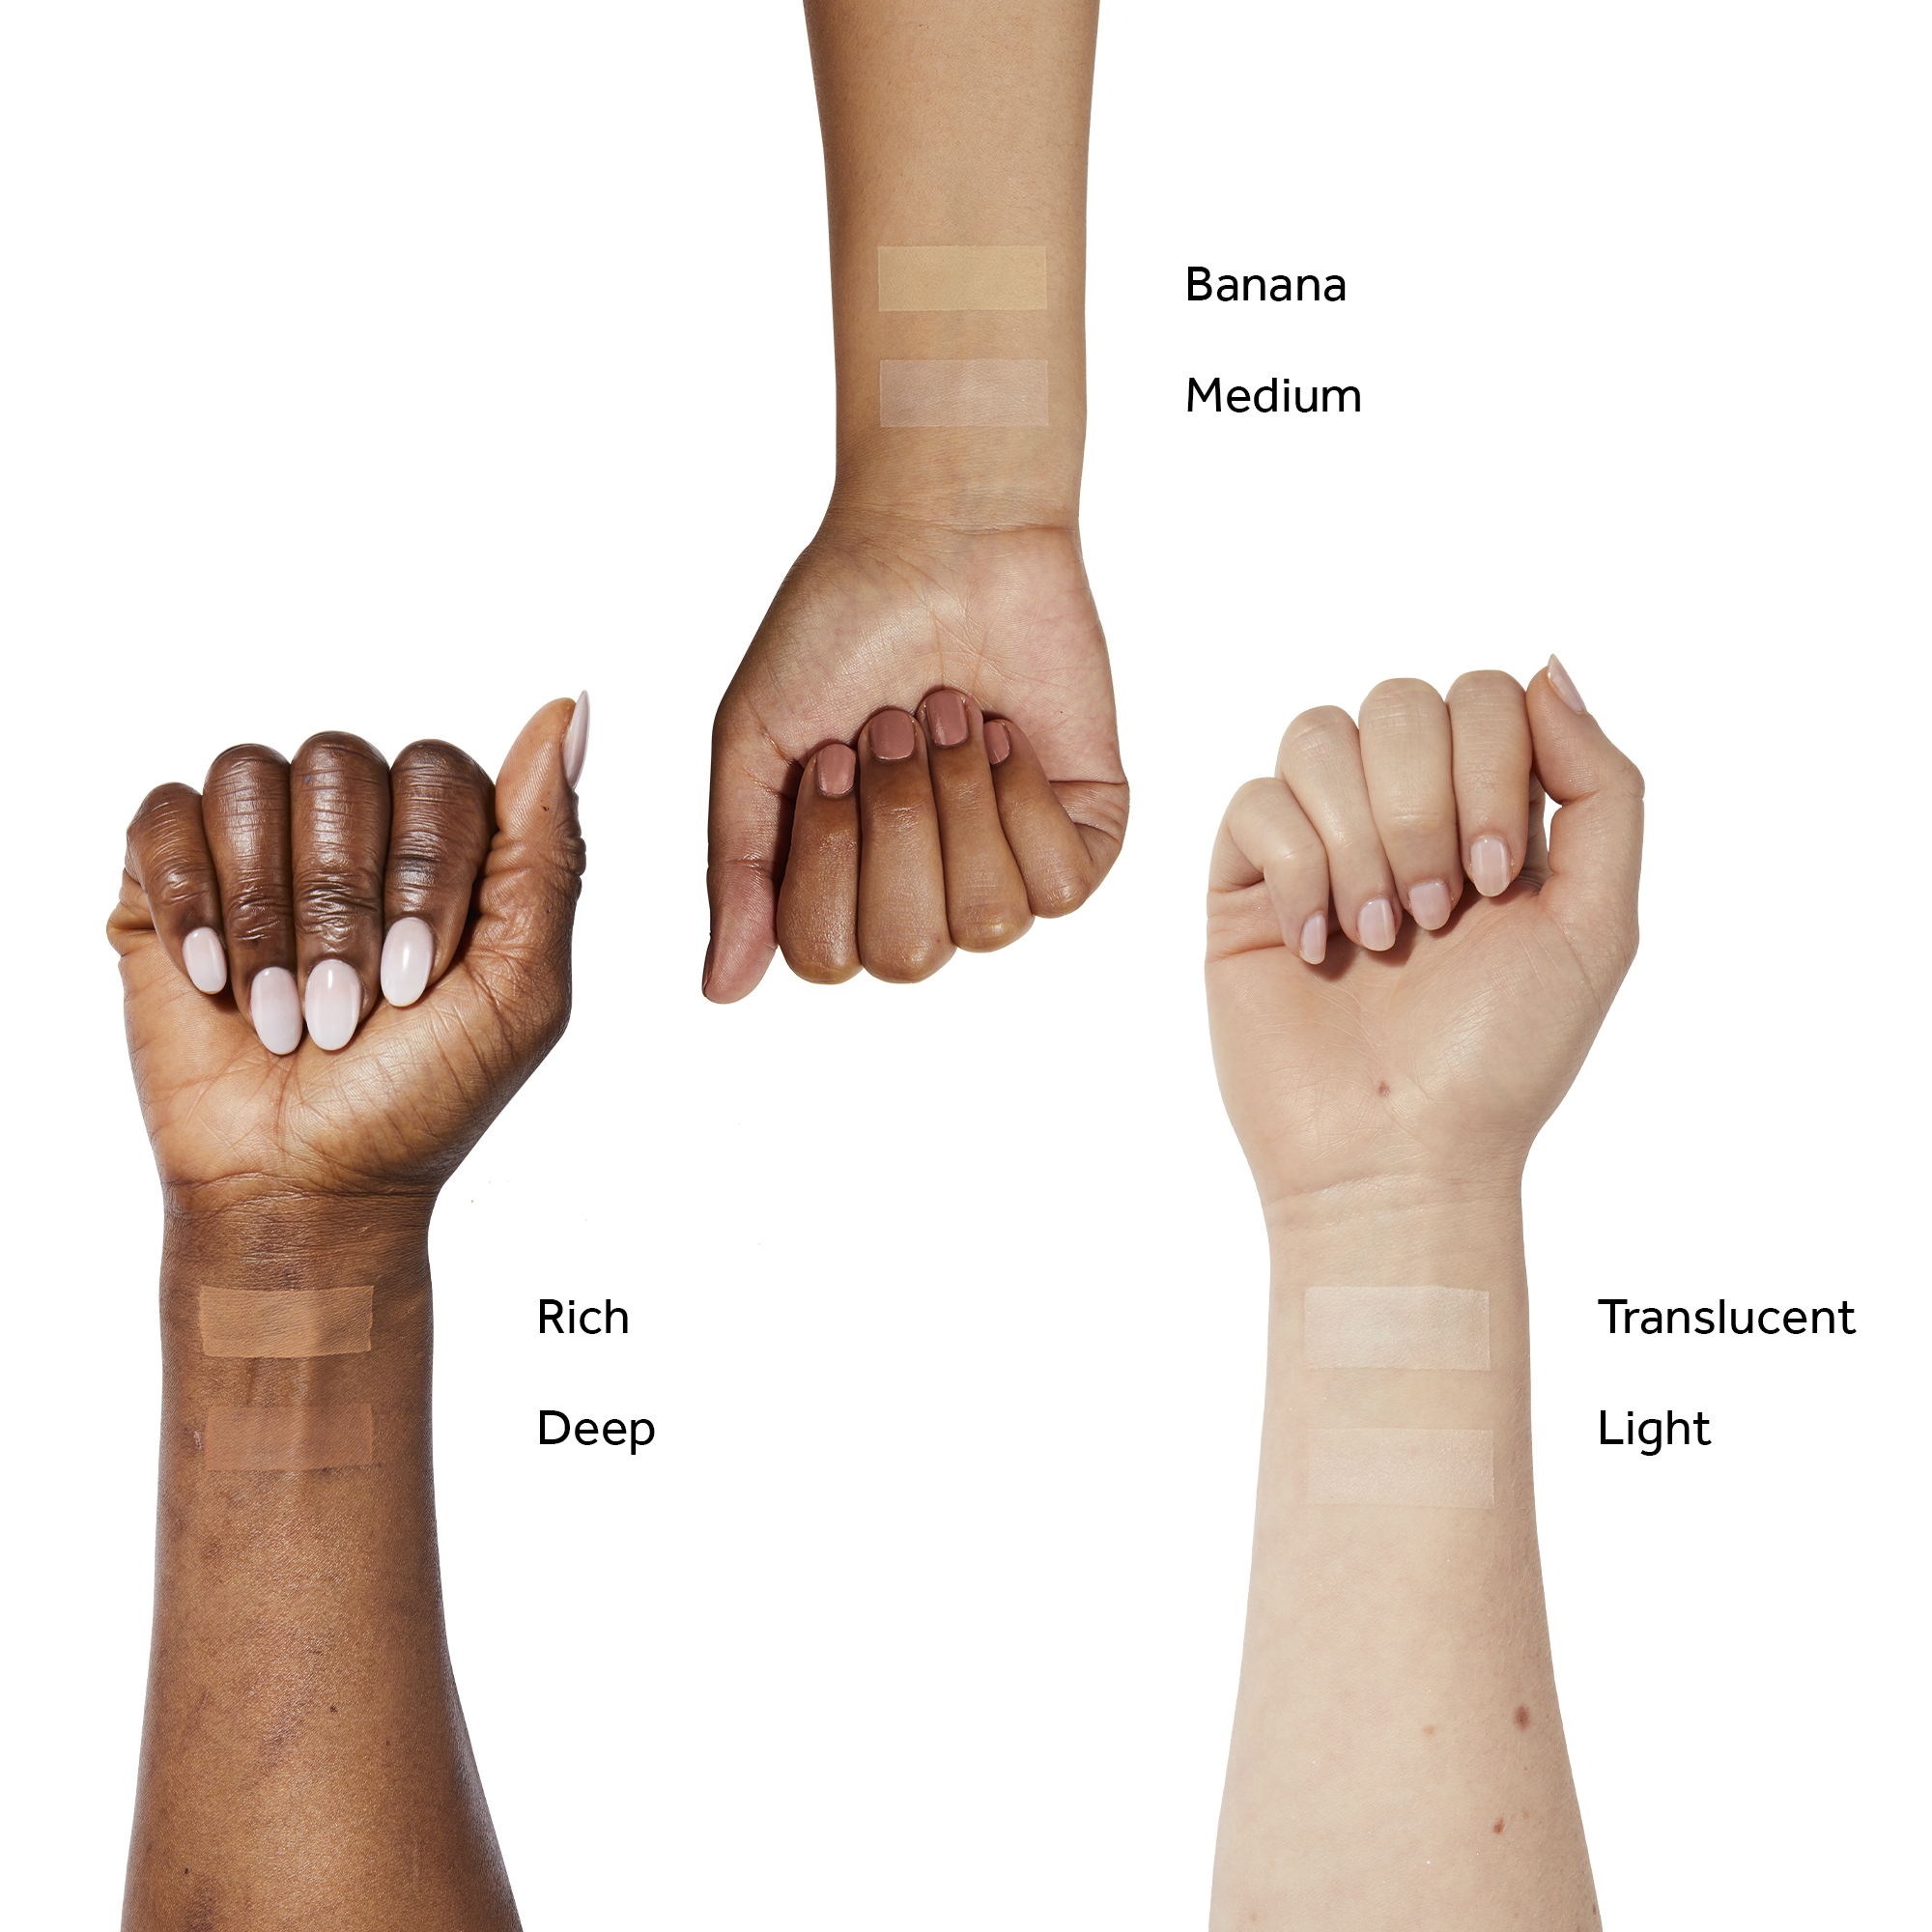 The image shows how the shades look on different skin types and the numbers show the shades. Rich, Deep. Banana, Medium. Translucent, Light.